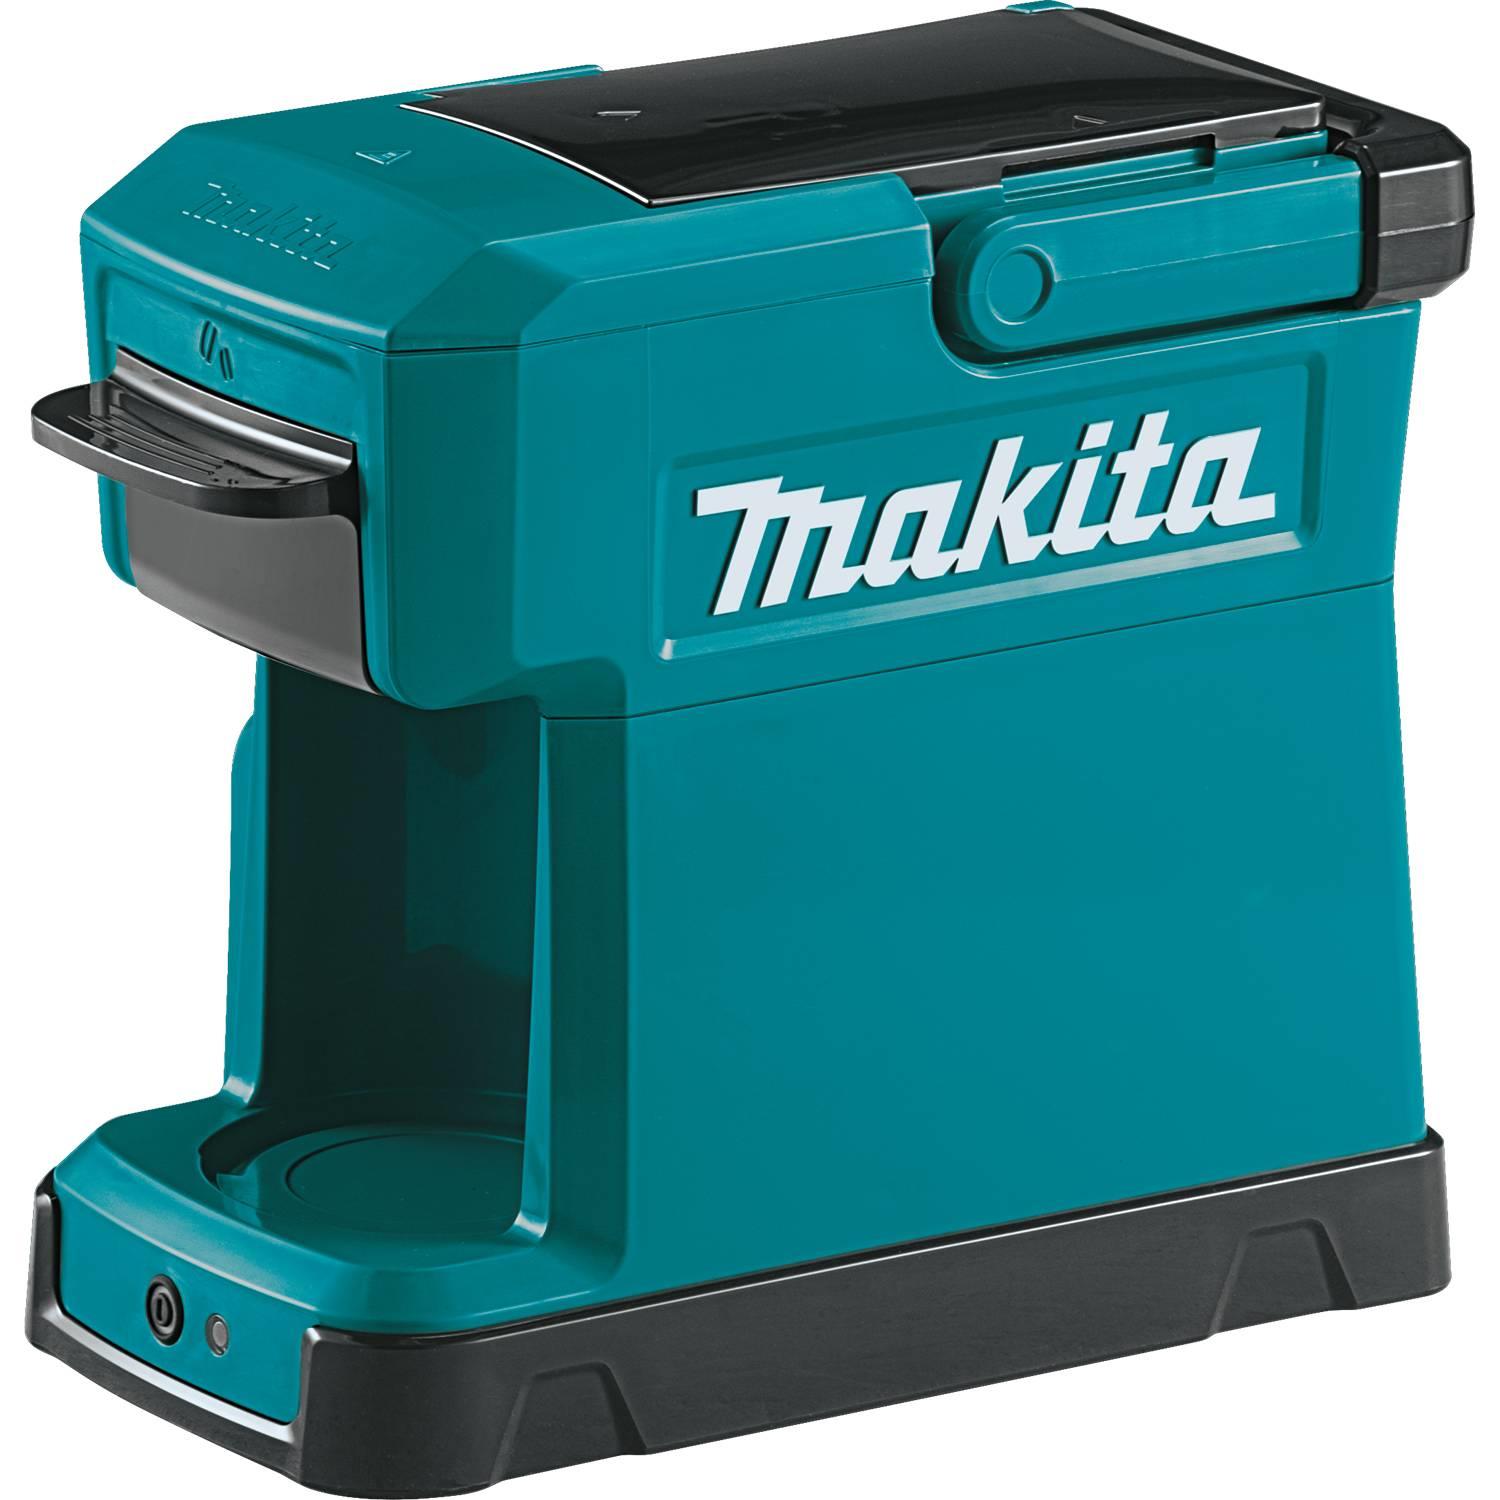 Makita 18V LXT Lithium-Ion Cordless Coffee Maker with battery